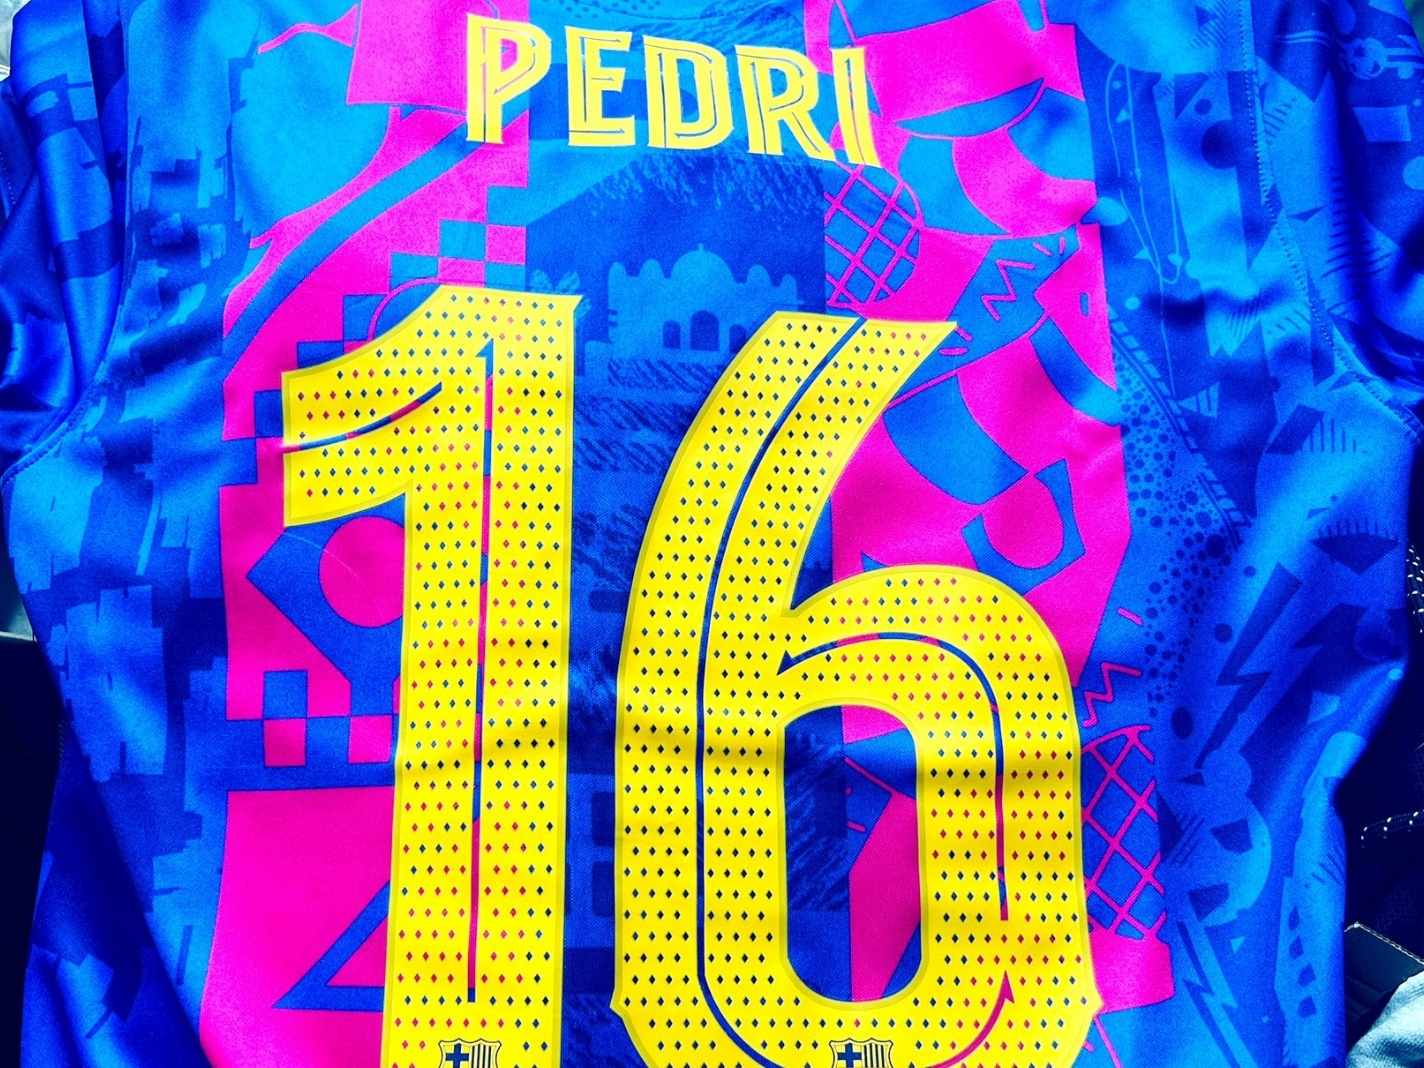 New marketing ploy to sell more Pedri shirts fails to impress Barcelona fans